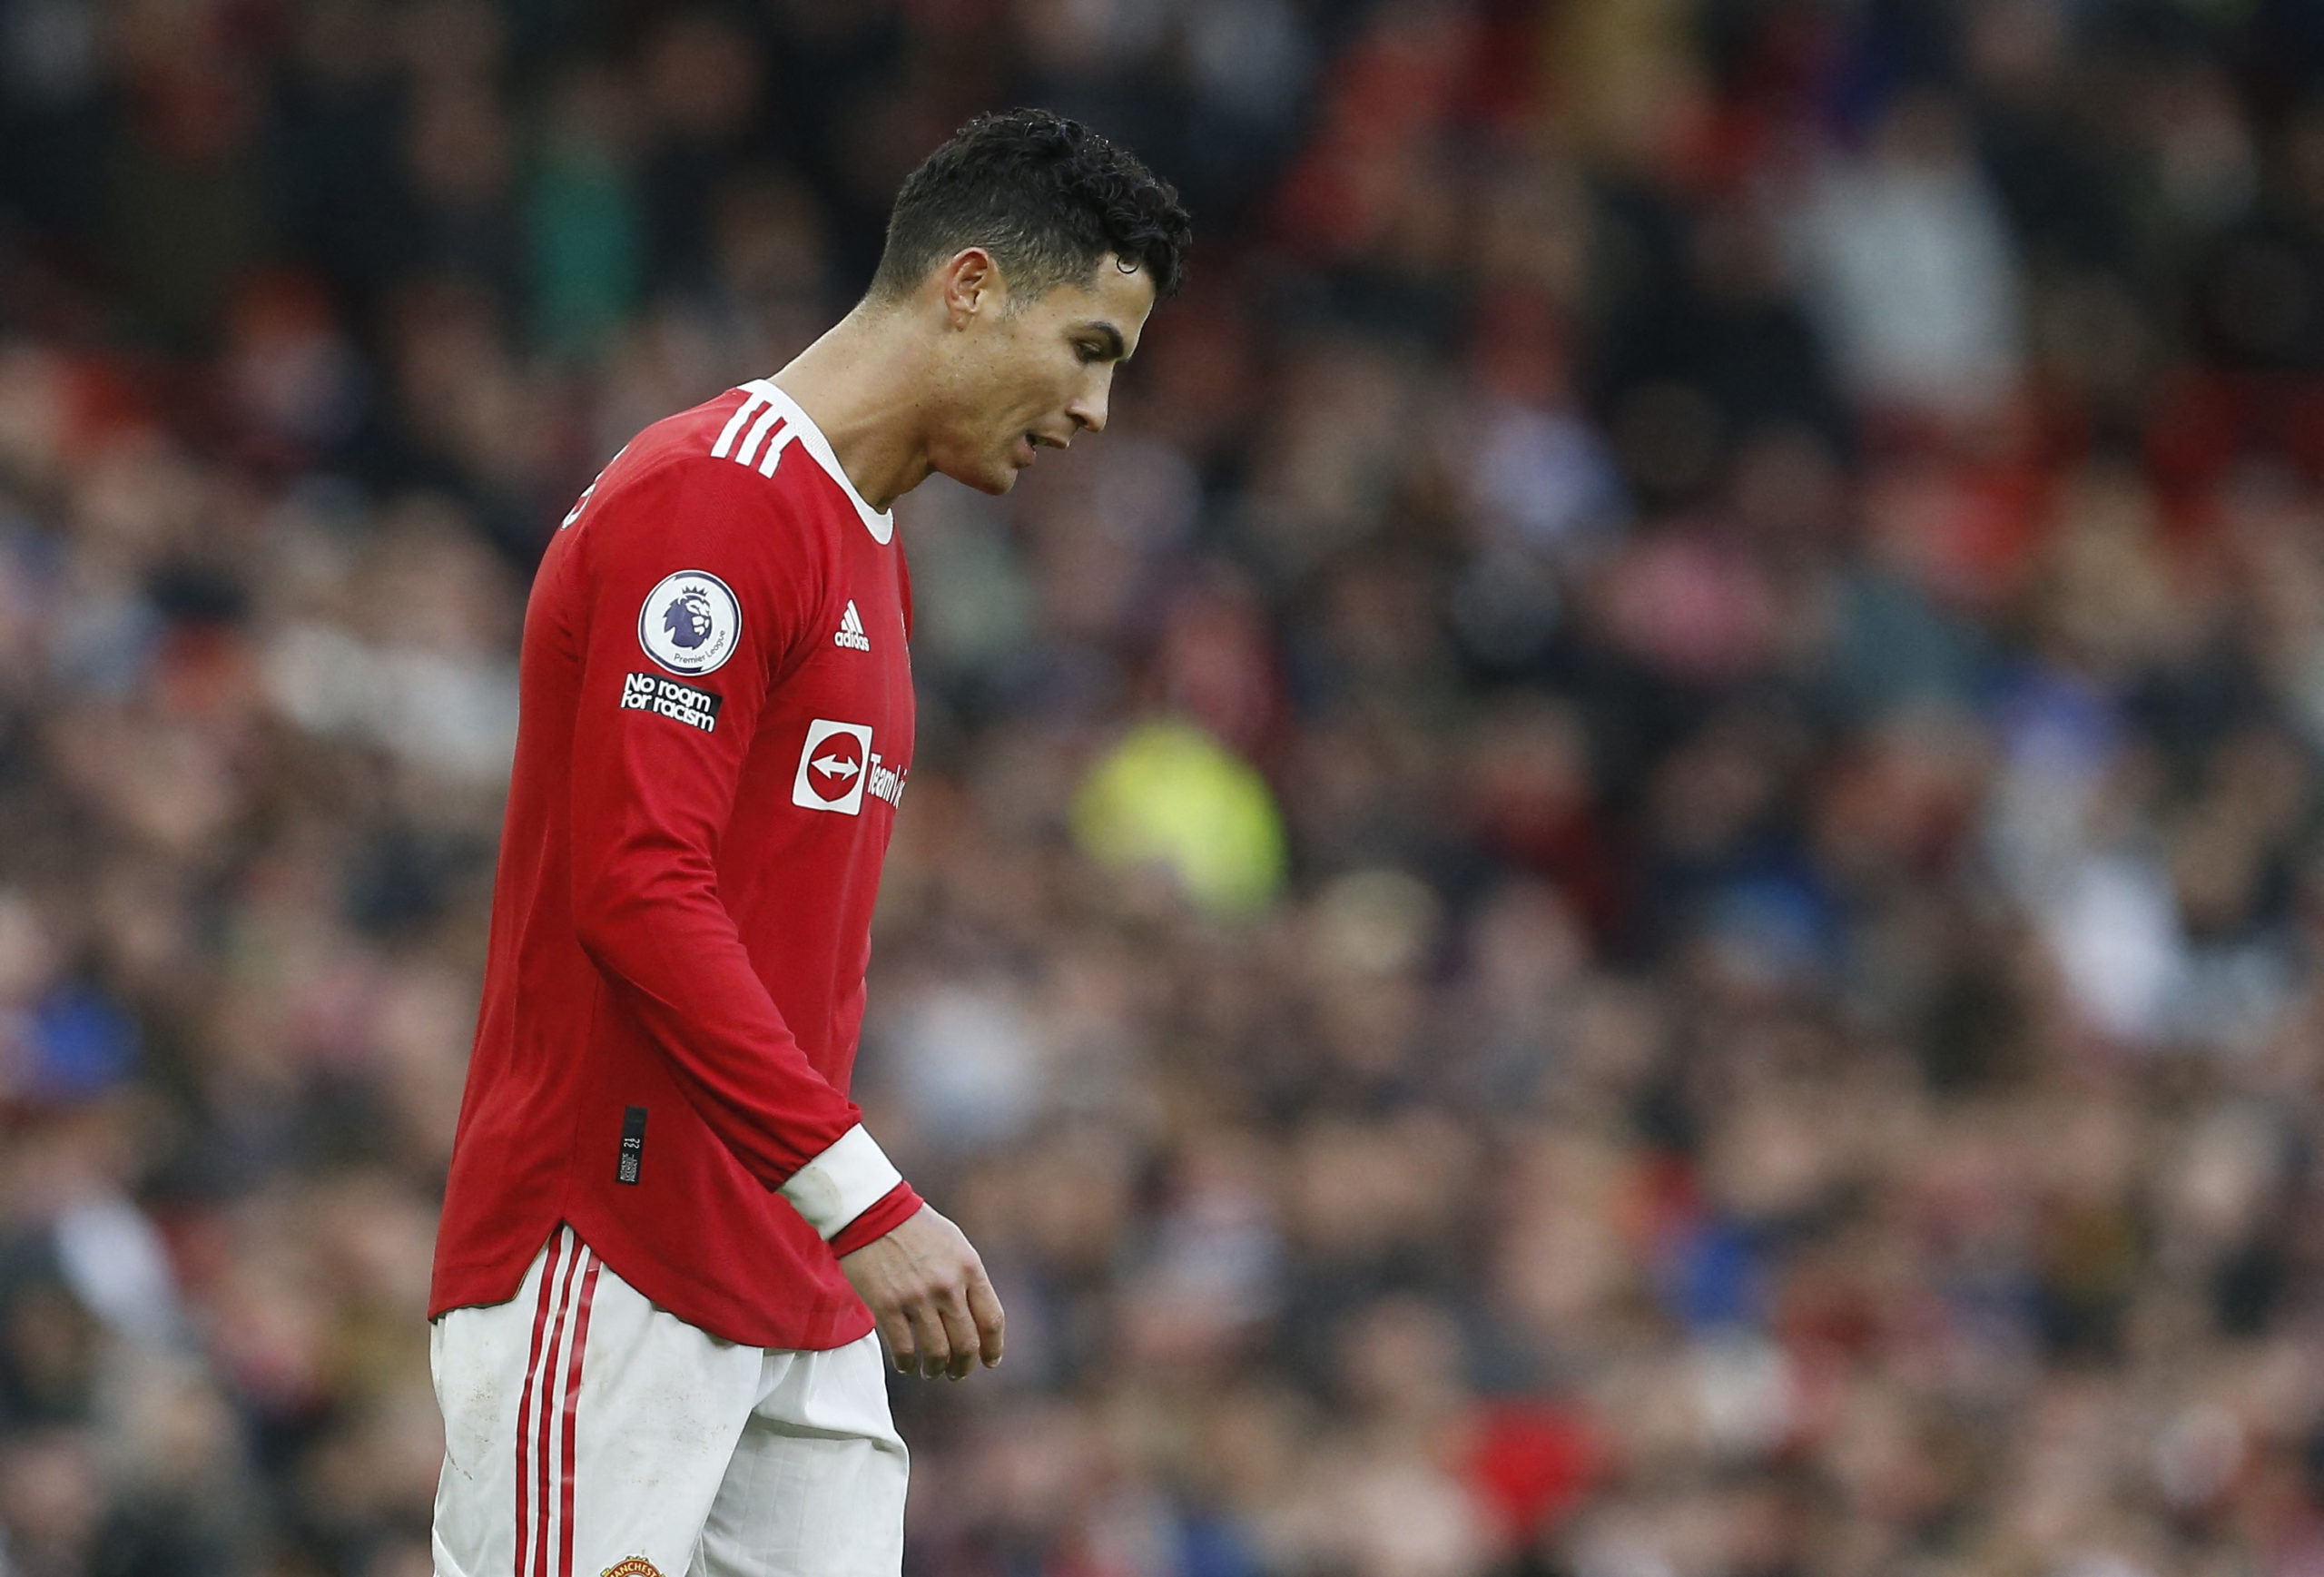 Football Football - English Premier League - Manchester United v Watford - Old Trafford, Manchester, England - February 26, 2022 Cristiano Ronaldo of Manchester United reacts